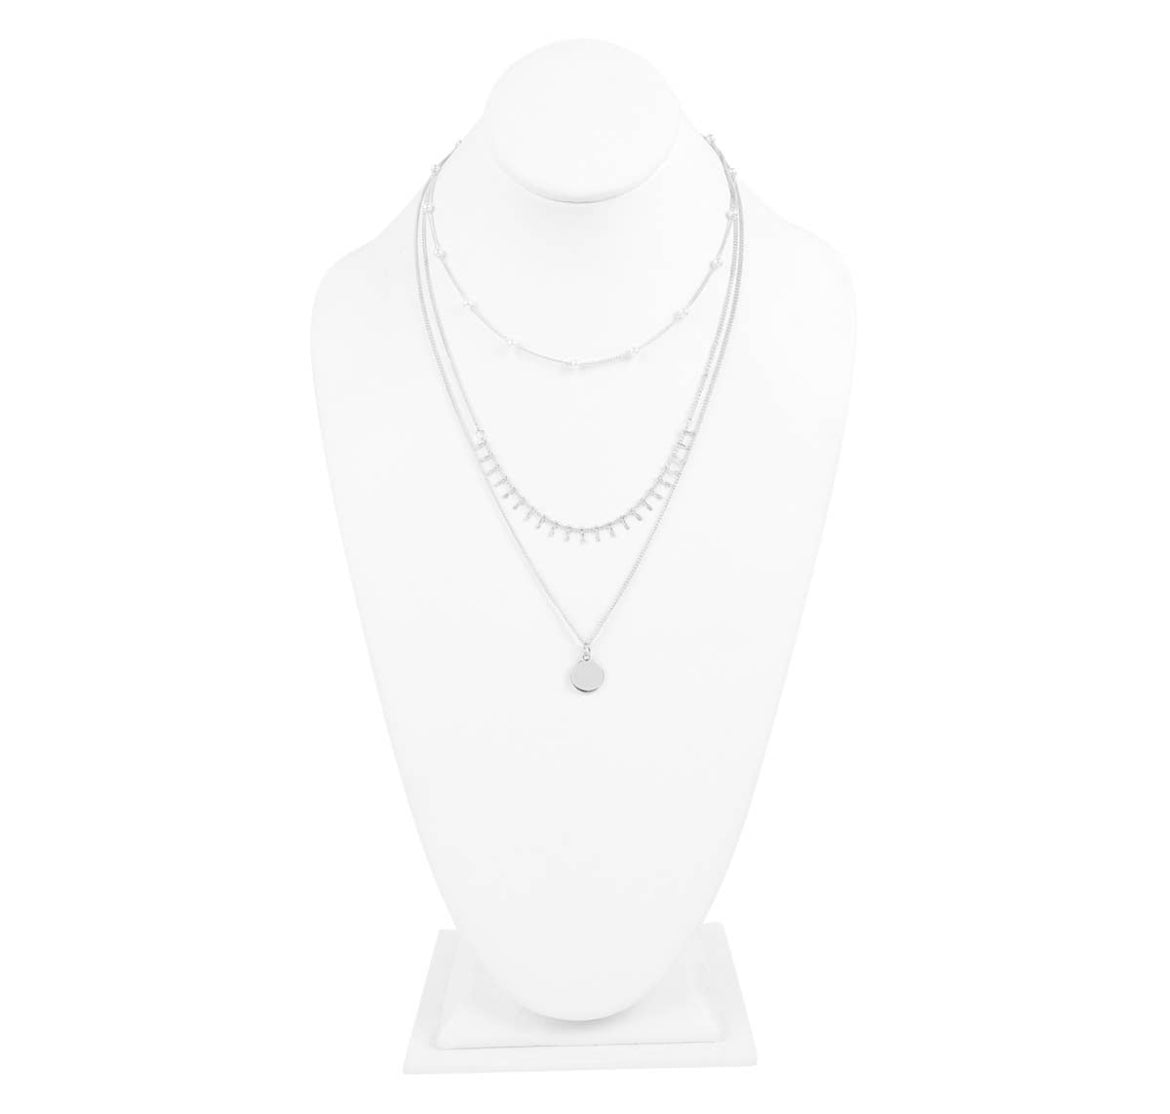 Lavishly Layered Necklace in Silver